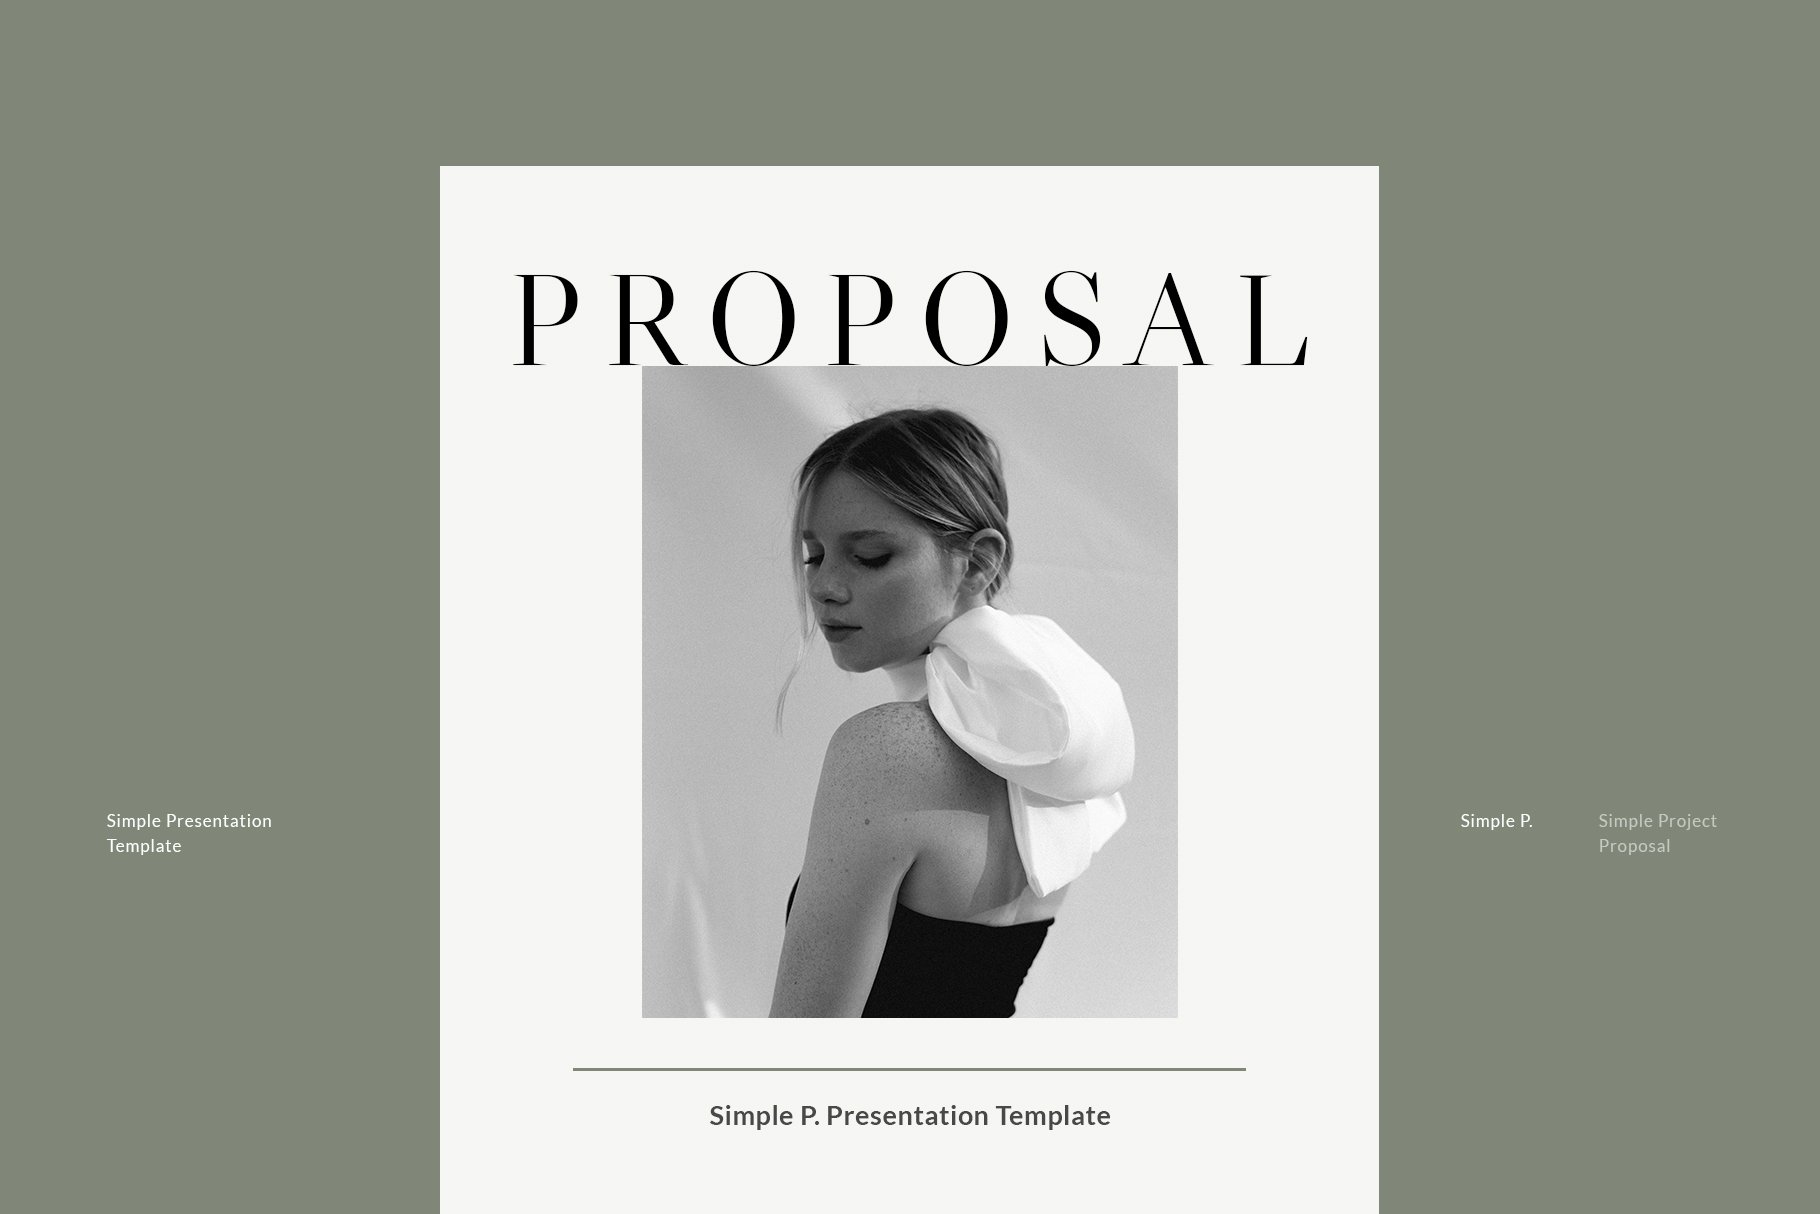 Proposal Presentation Template cover image.